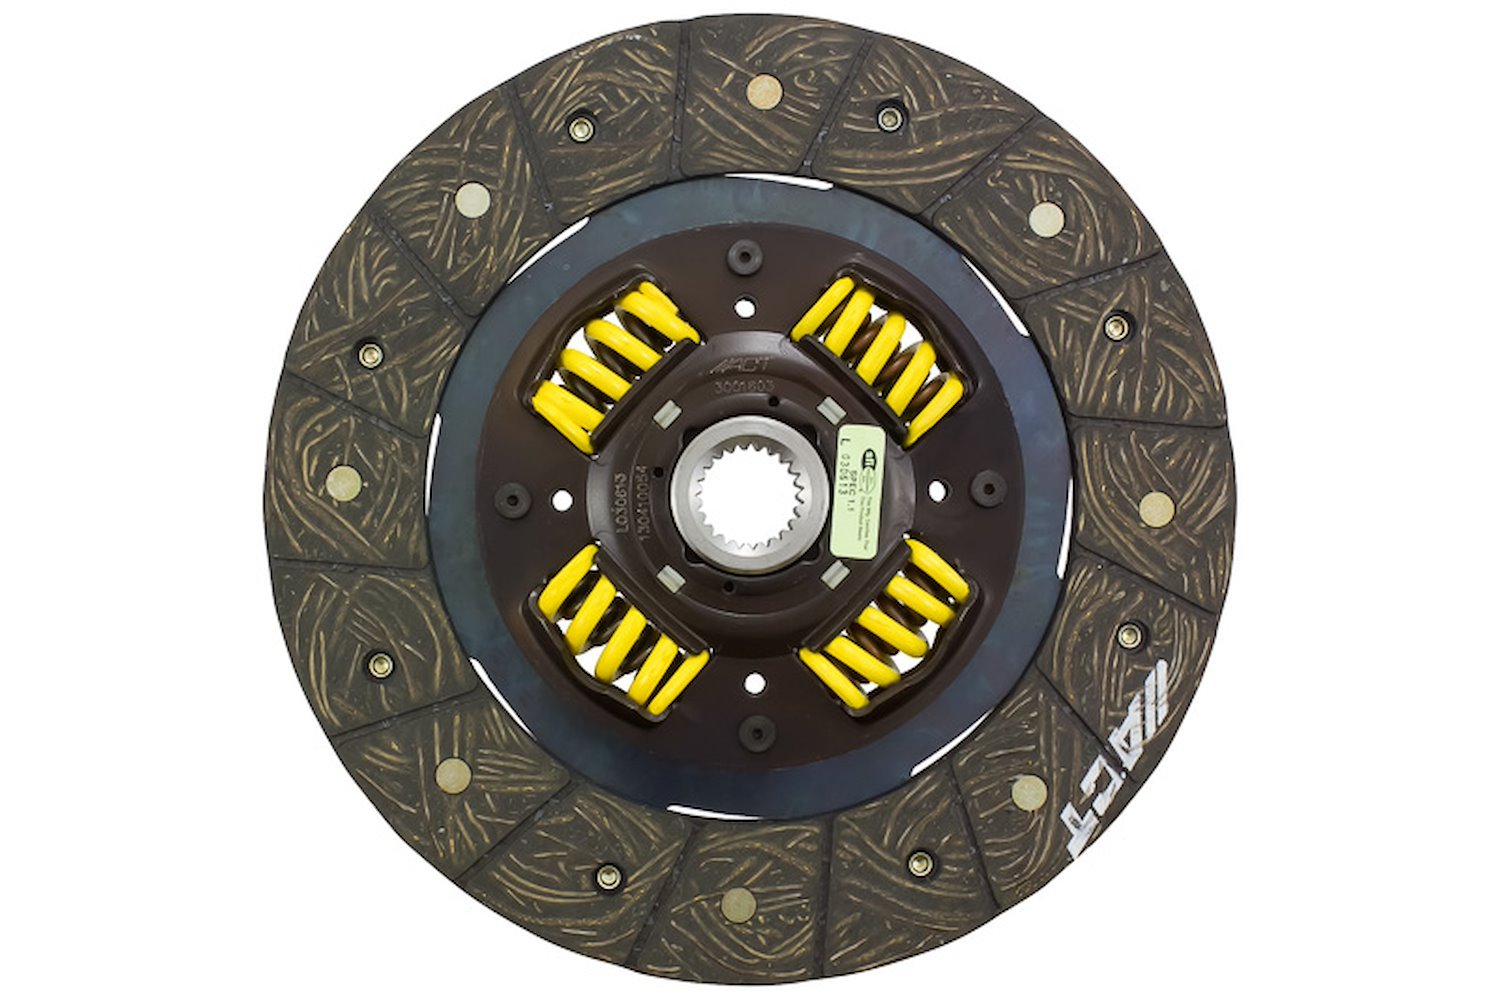 Performance Street Sprung Disc Transmission Clutch Friction Plate Fits Select Multiple Makes/Models